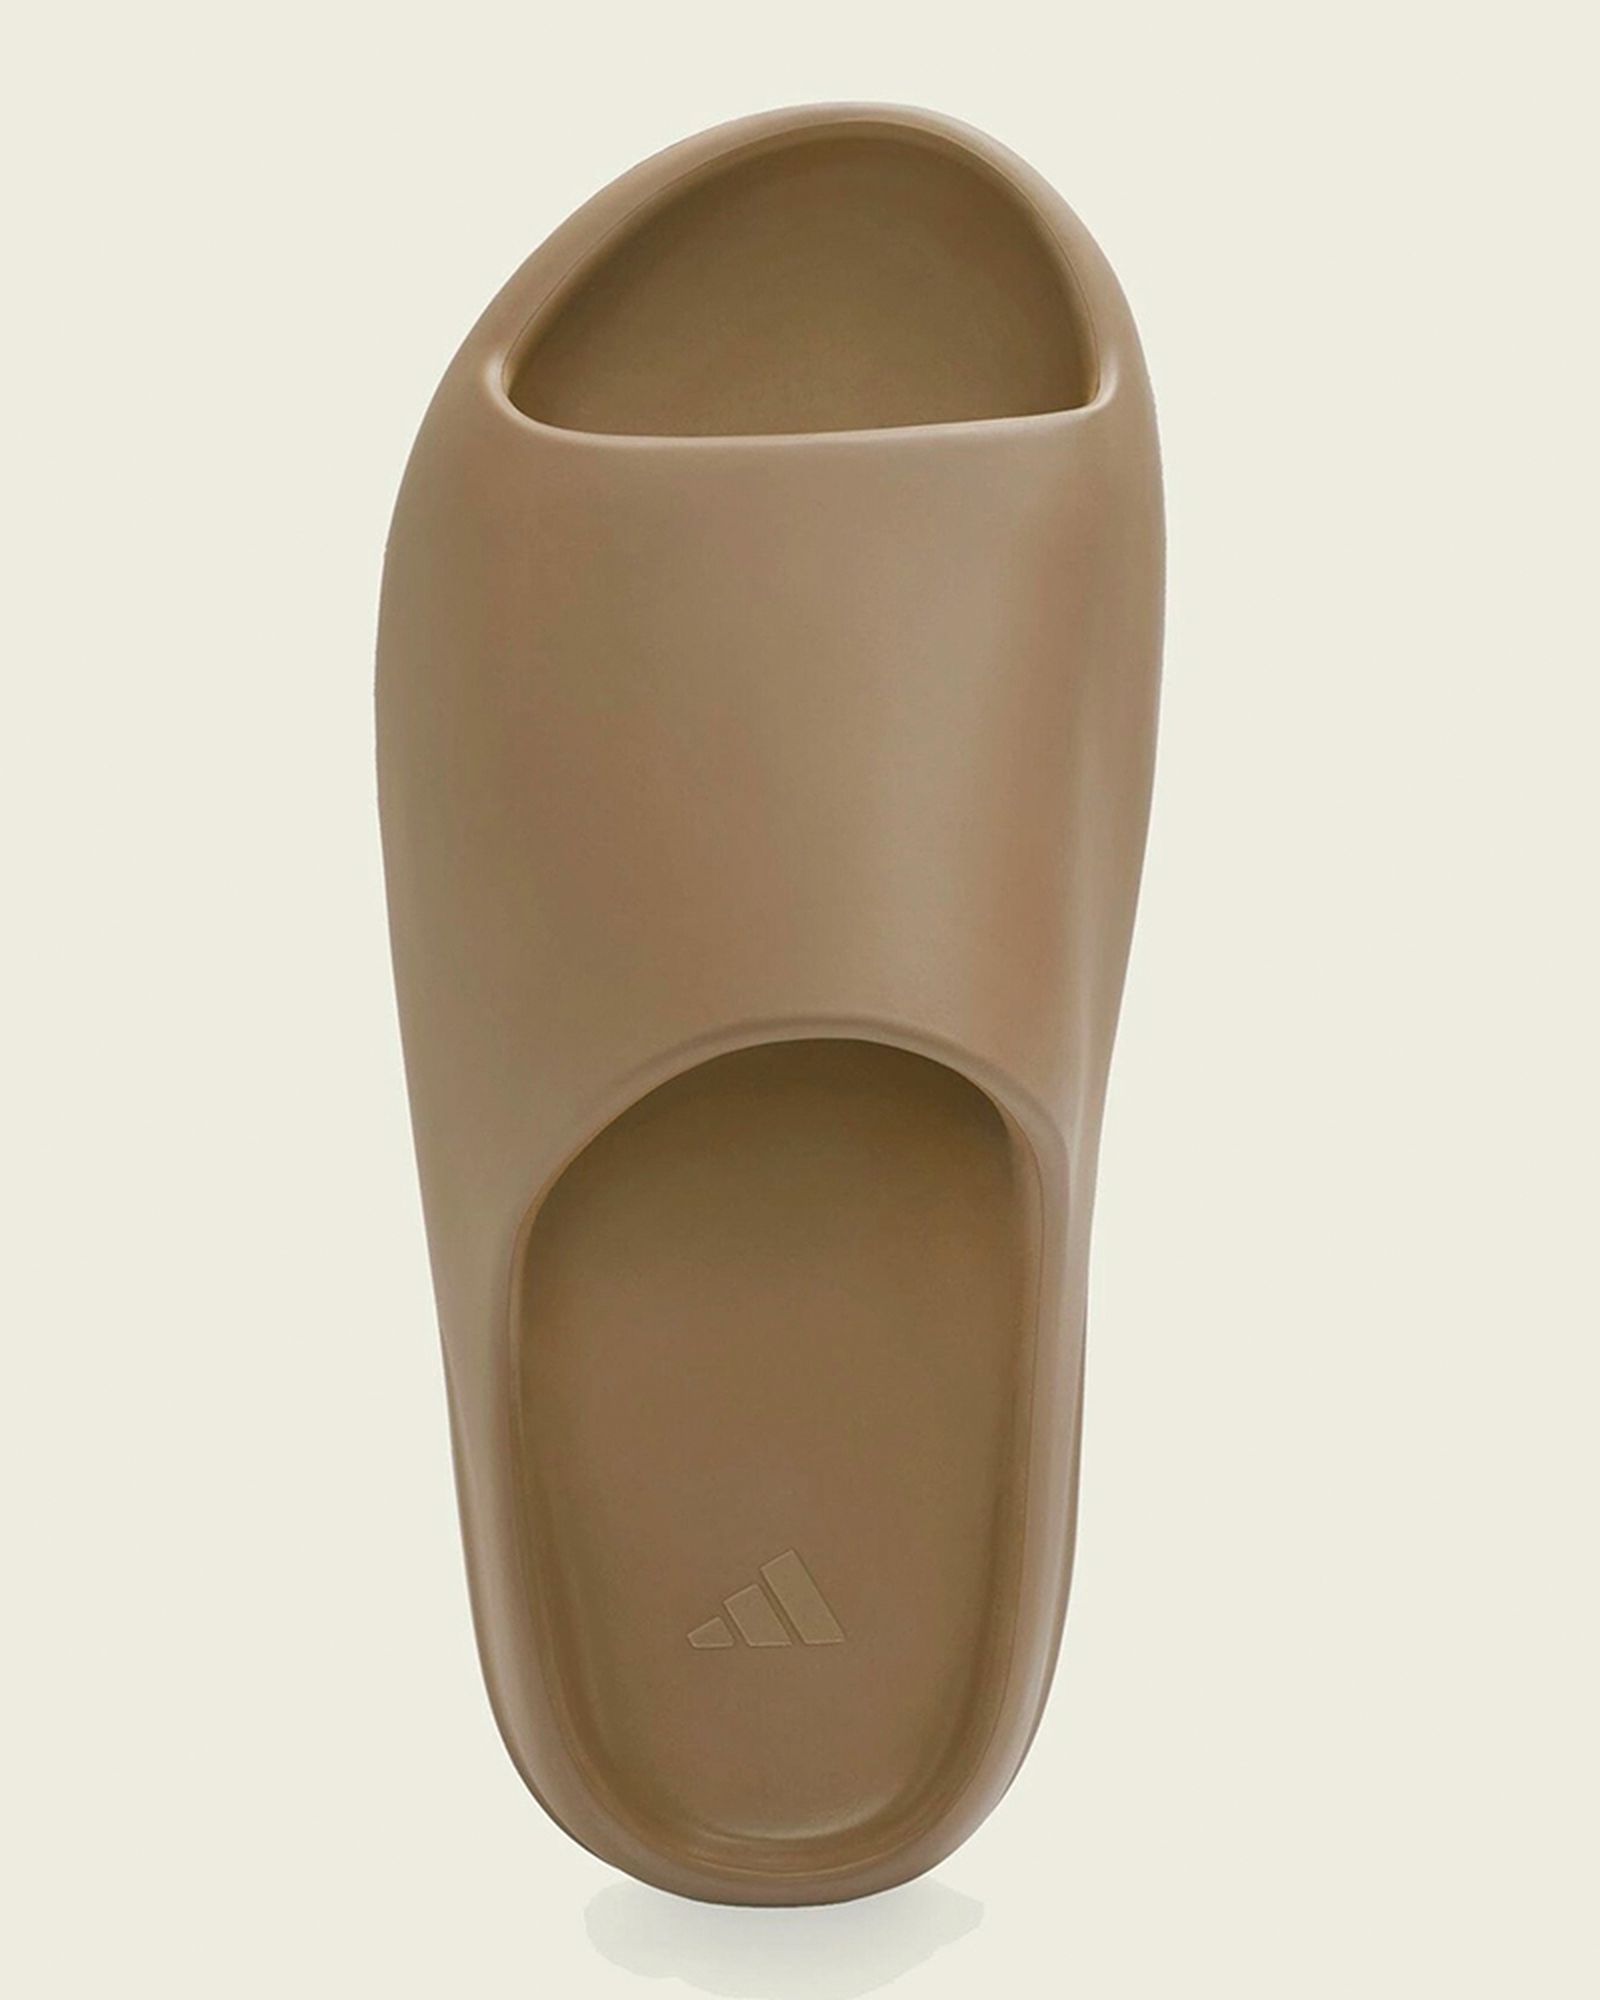 Where Can the adidas YEEZY Slide